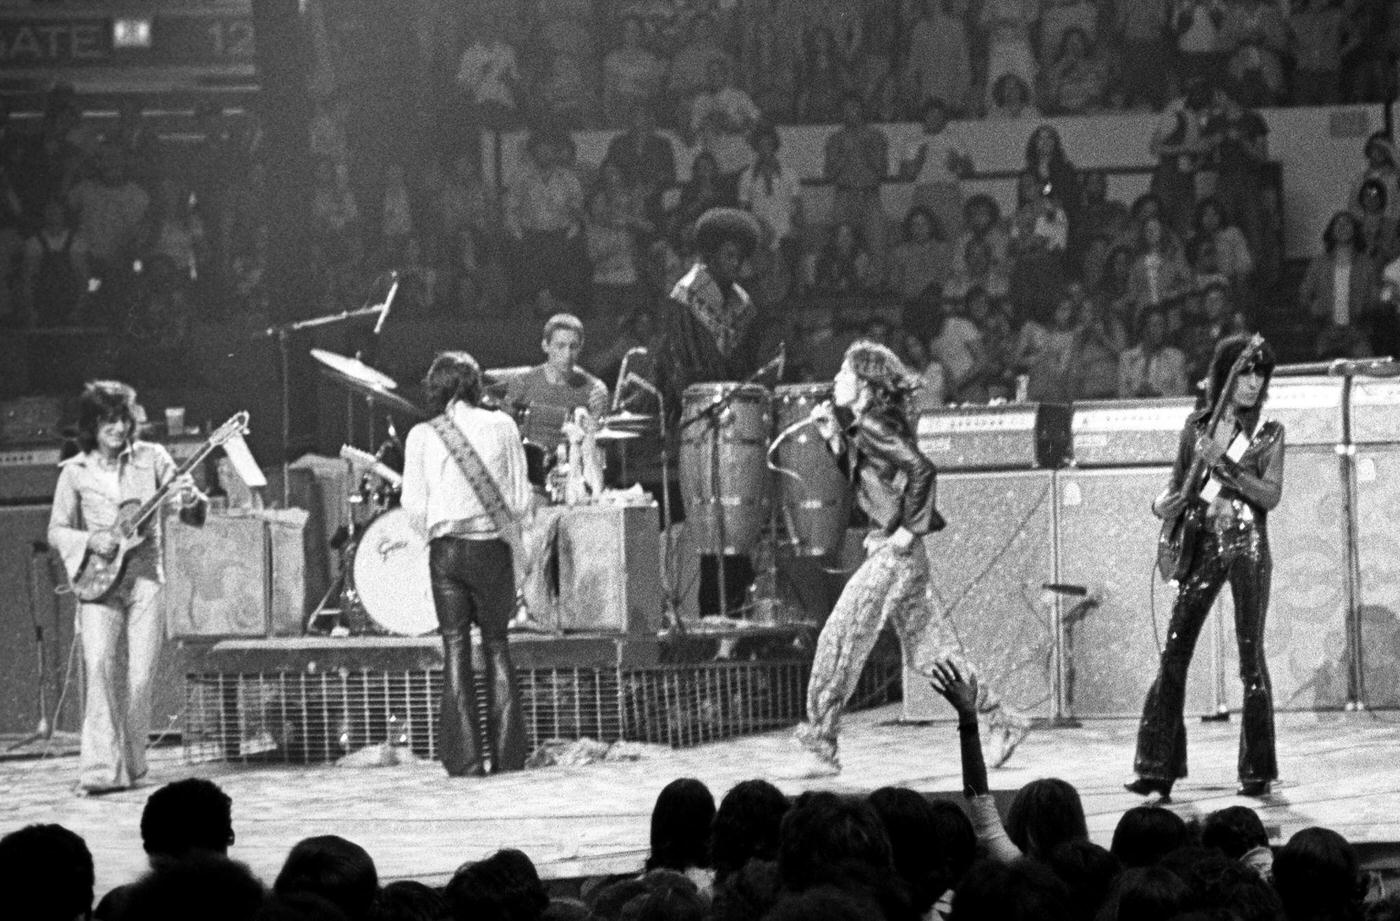 Ronnie Wood, Keith Richards, Charlie Watts, Mick Jagger, and Bill Wyman perform with percussionist Ollie Brown at Madison Square Garden during the band's "Tour of America '75" on June 25, 1975, in New York, New York.